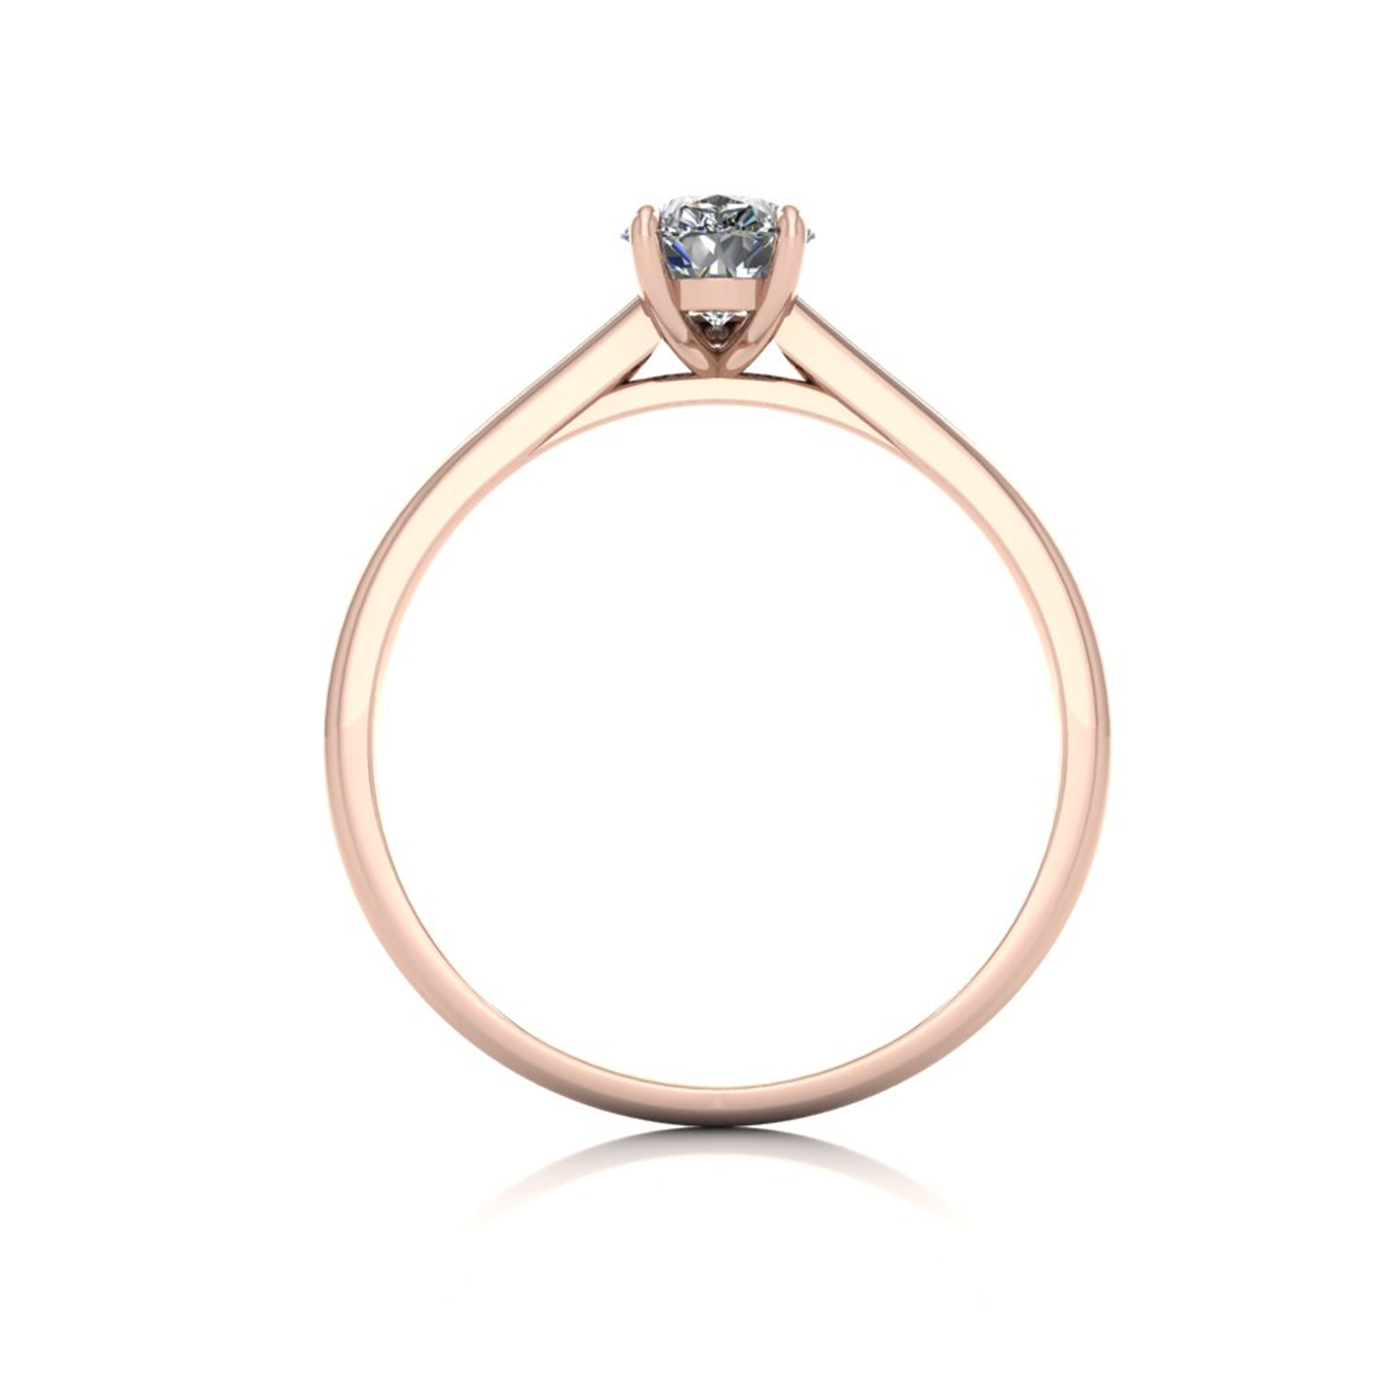 18k rose gold  0,80 ct 3 prongs solitaire pear cut diamond engagement ring with whisper thin band